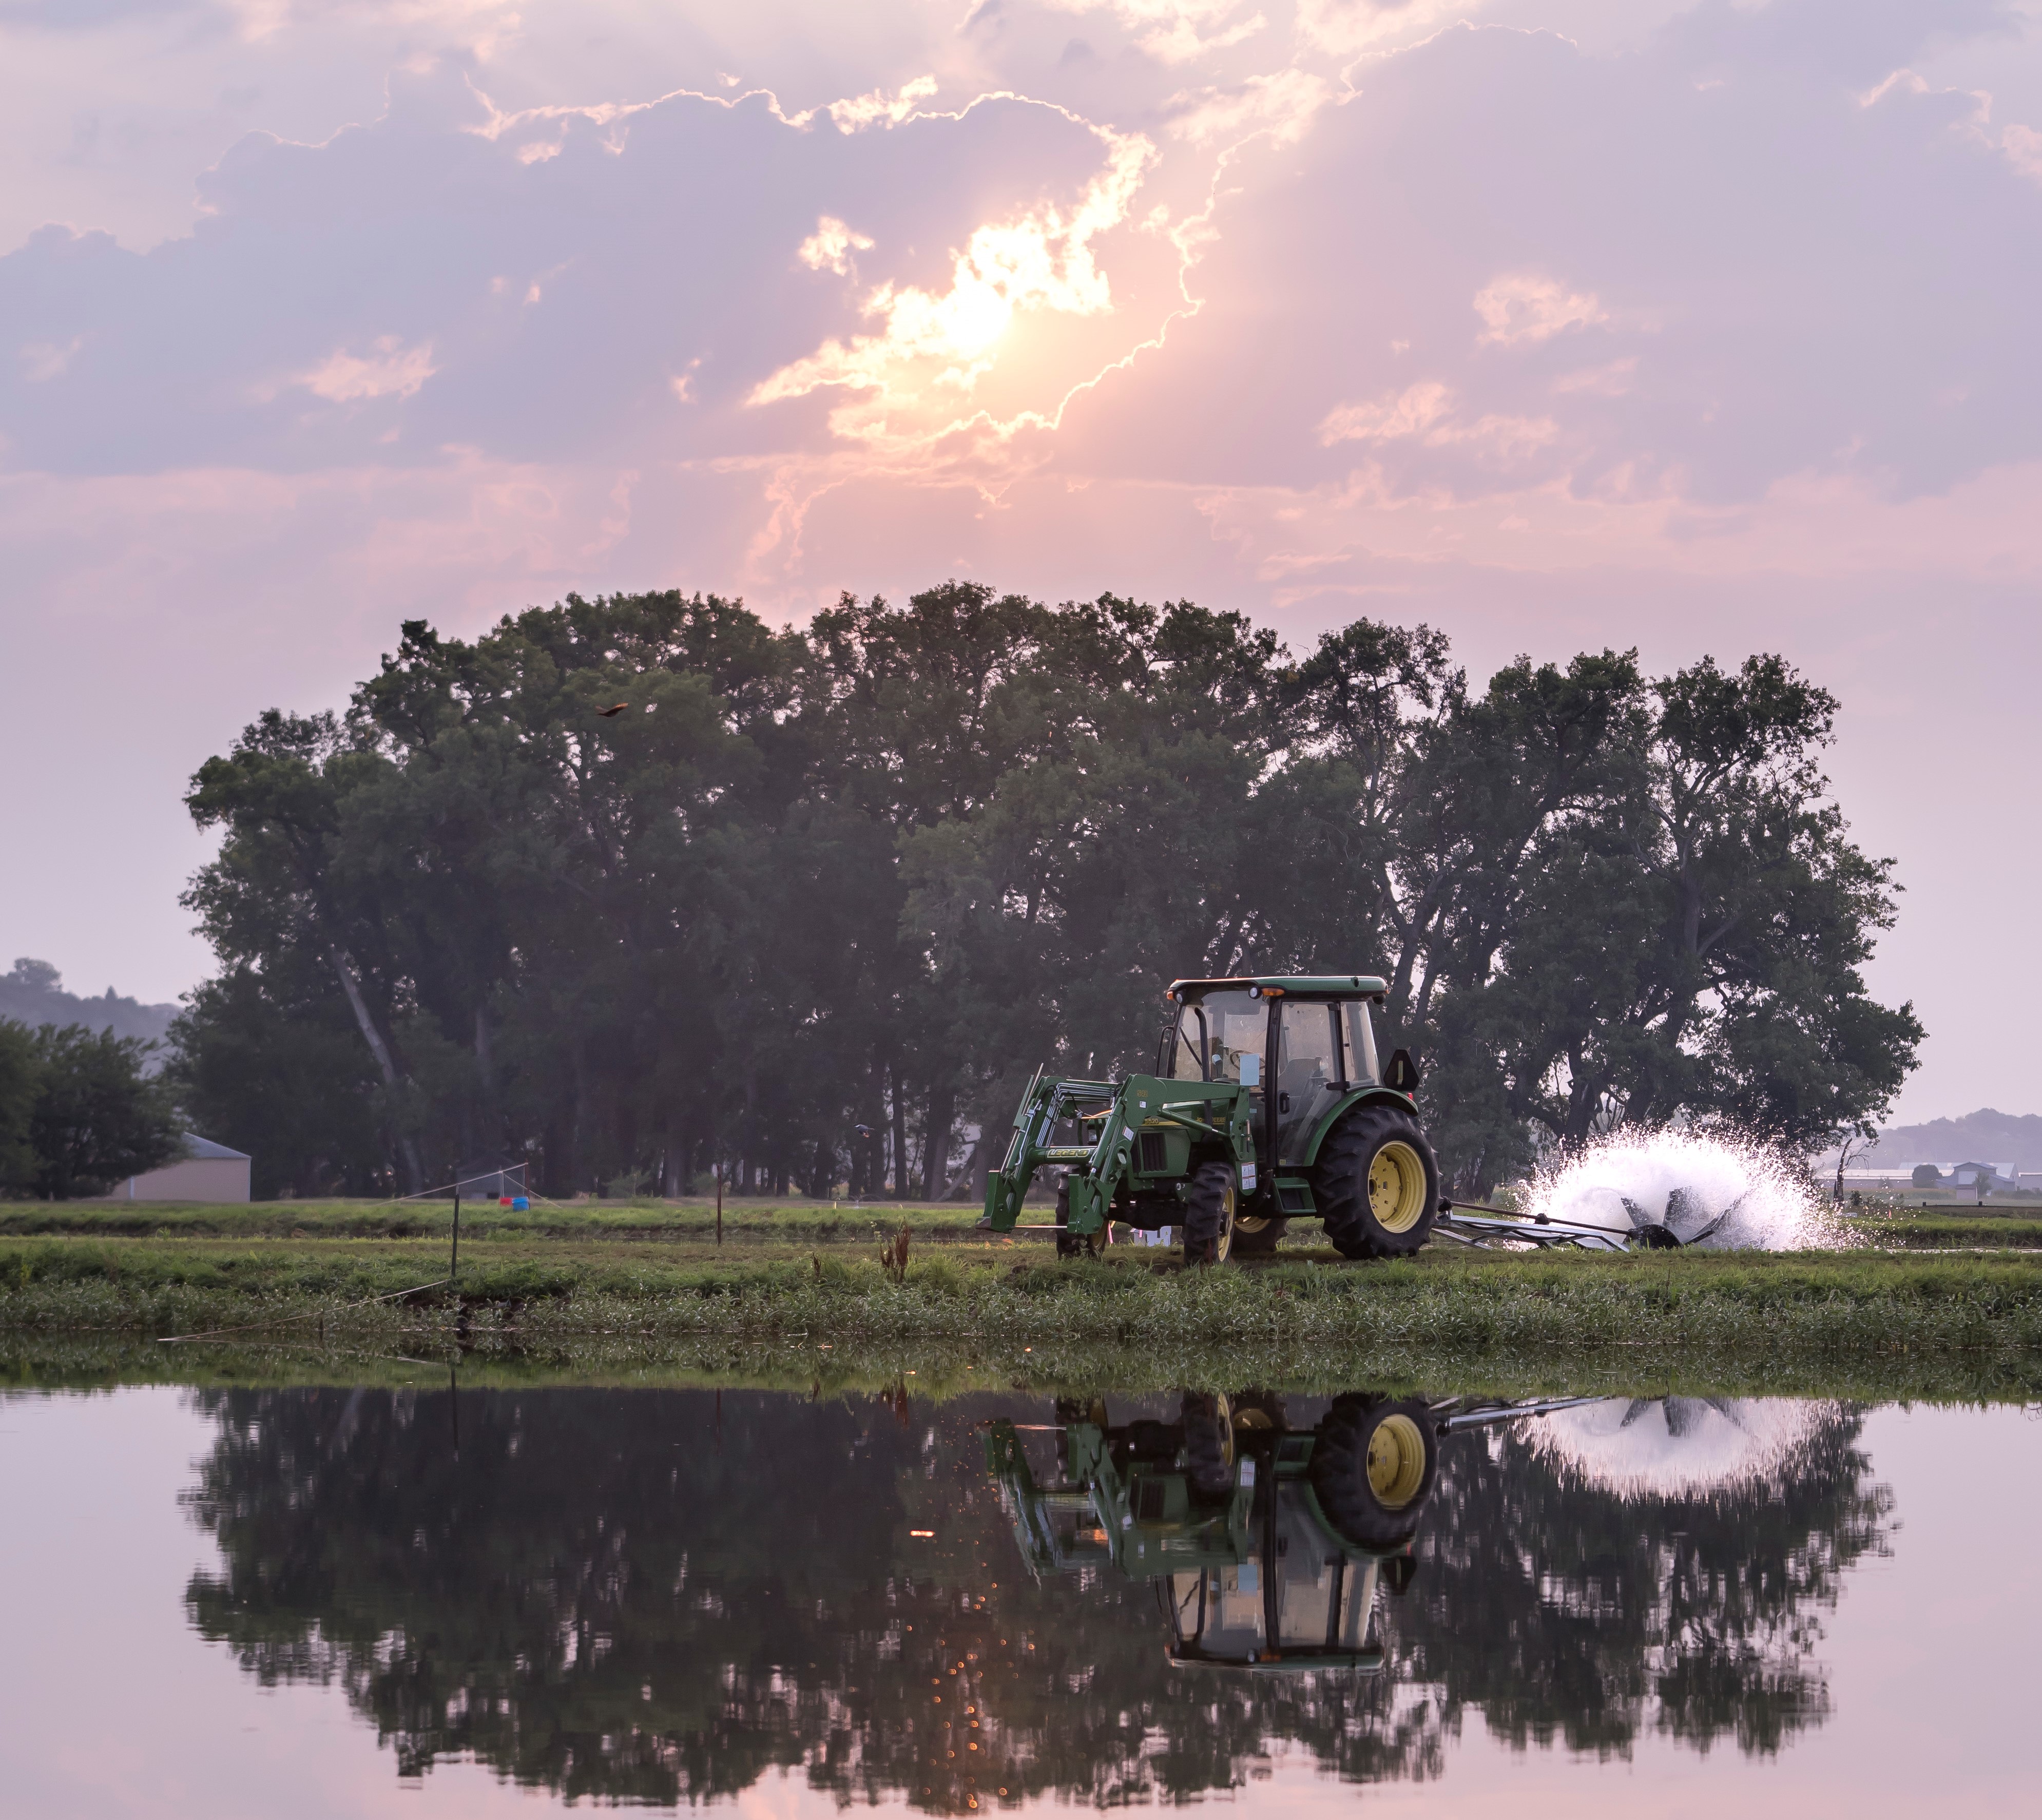 A large green tractor pulls a piece equipment to aerate a shallow pond with the sun peaking through the morning clouds and a stand of trees in the distance